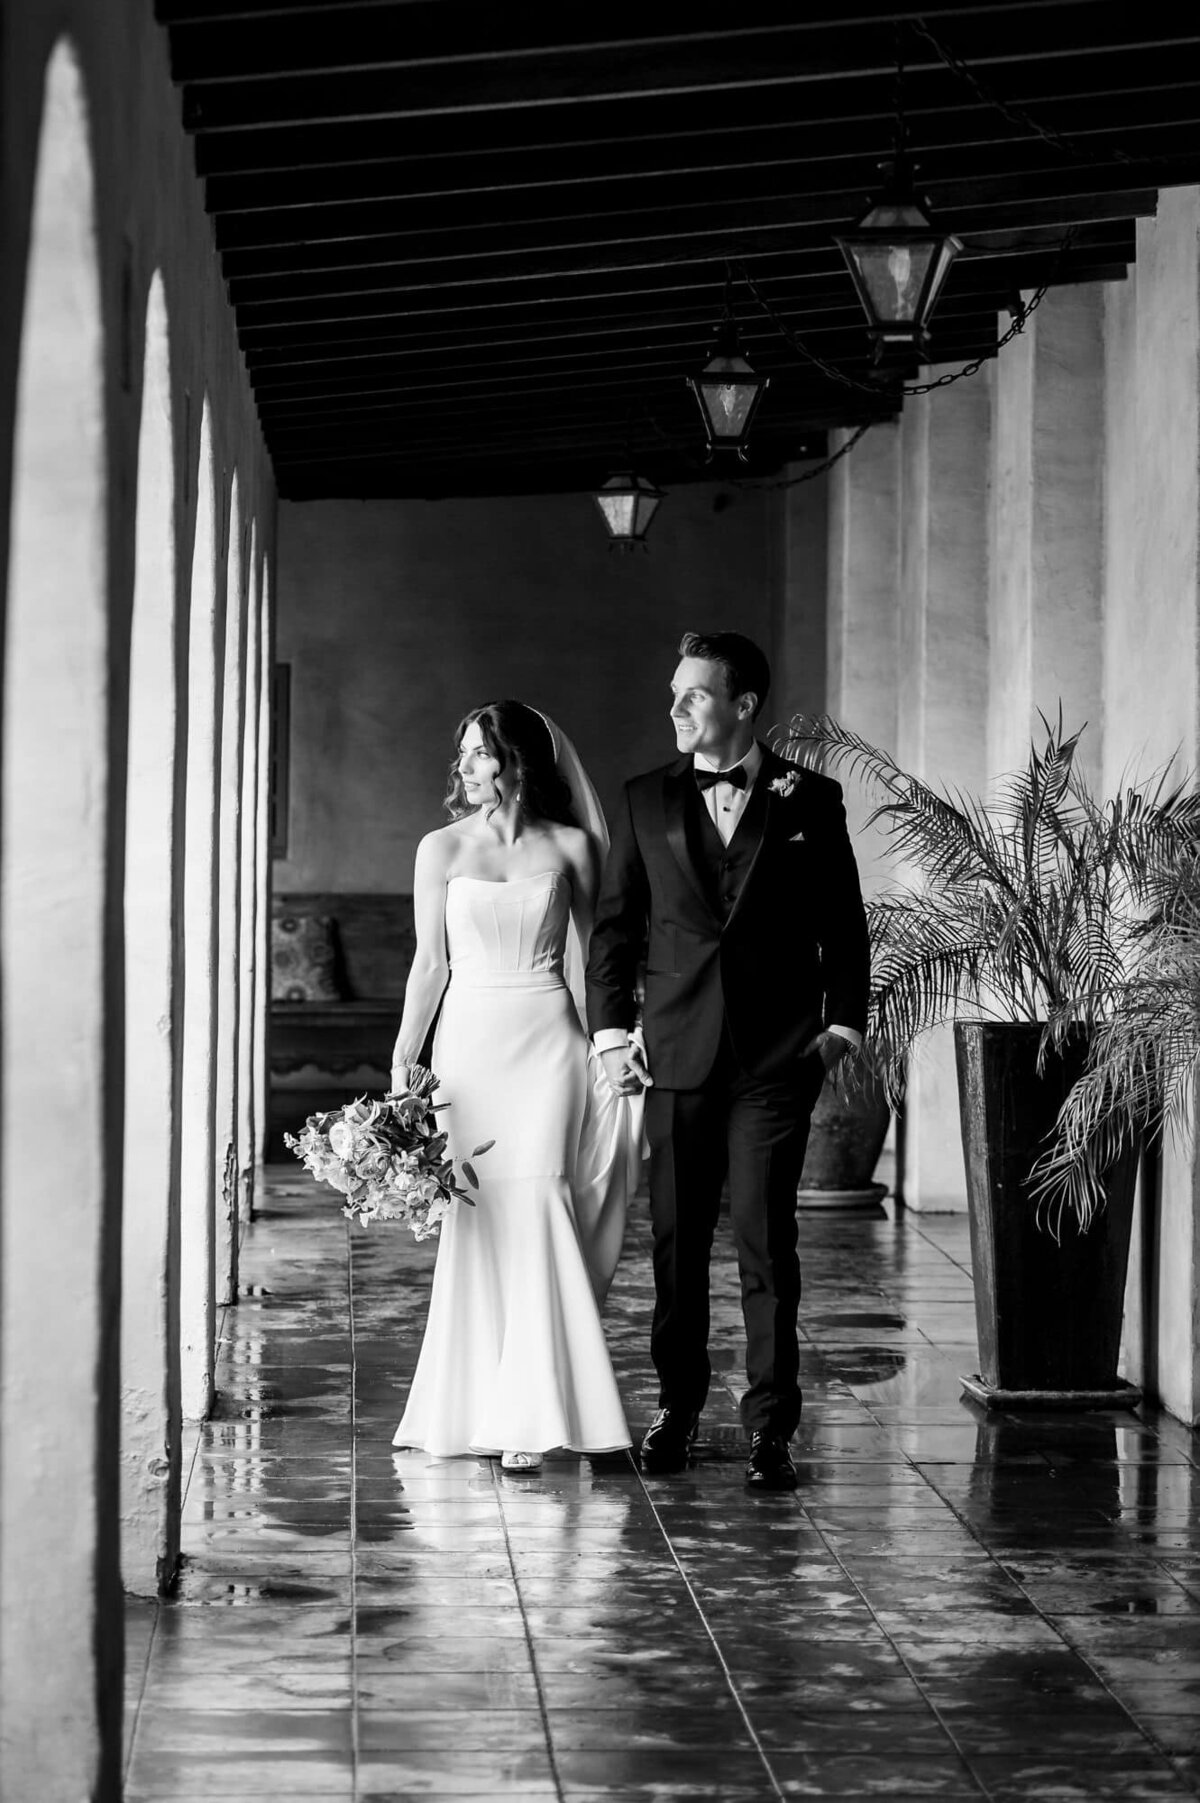 Wedding at The Royal Palms Bride and Groom holding hands walking in black and white